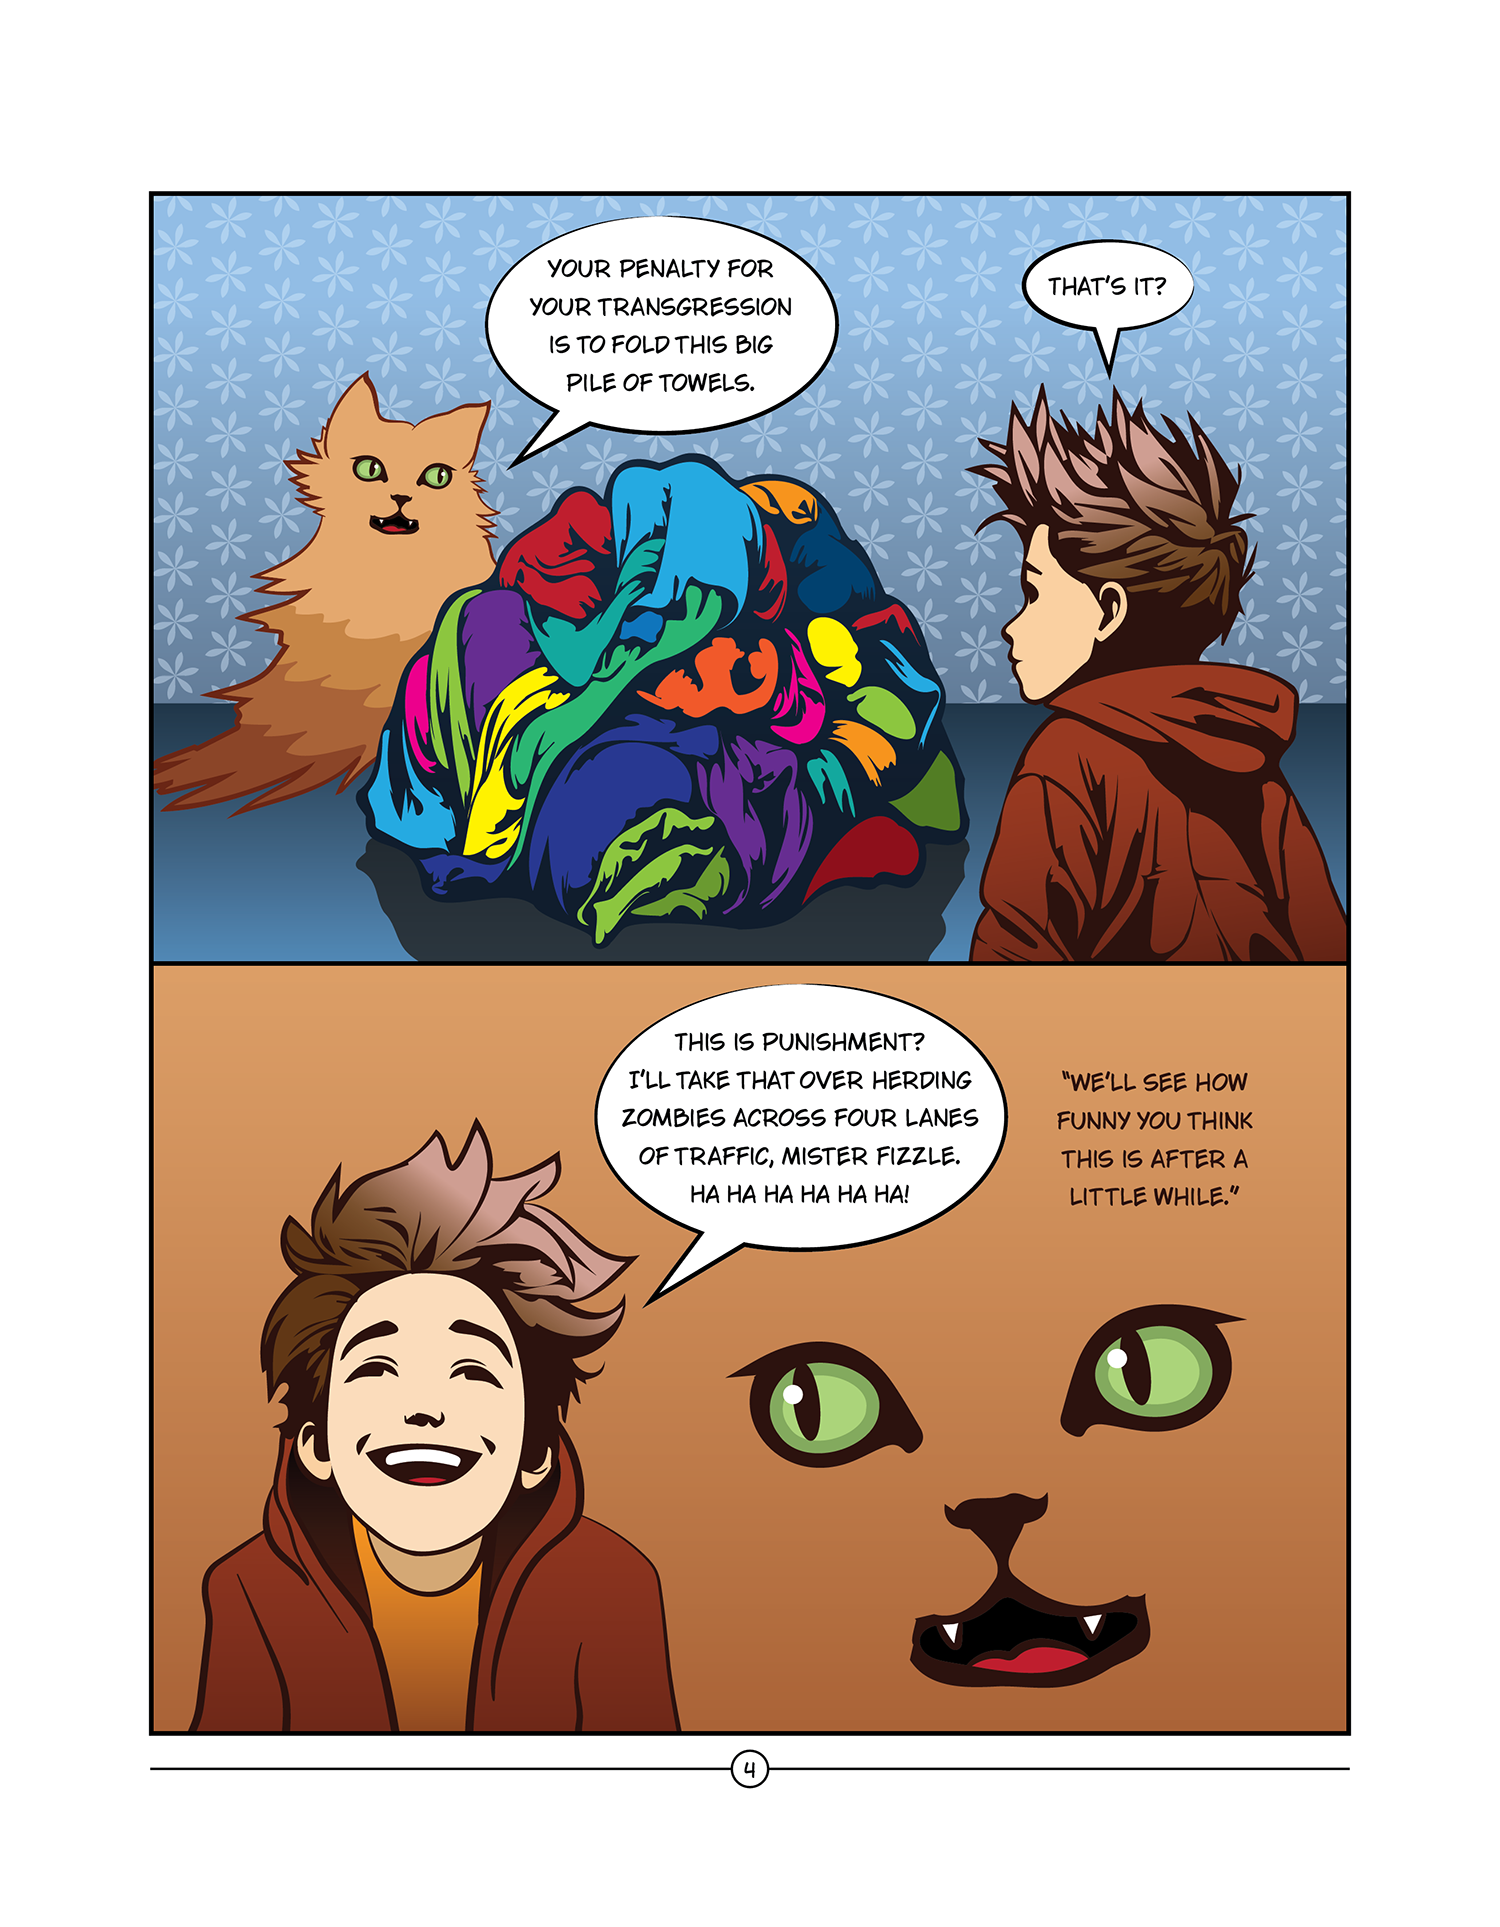 LPD-page4